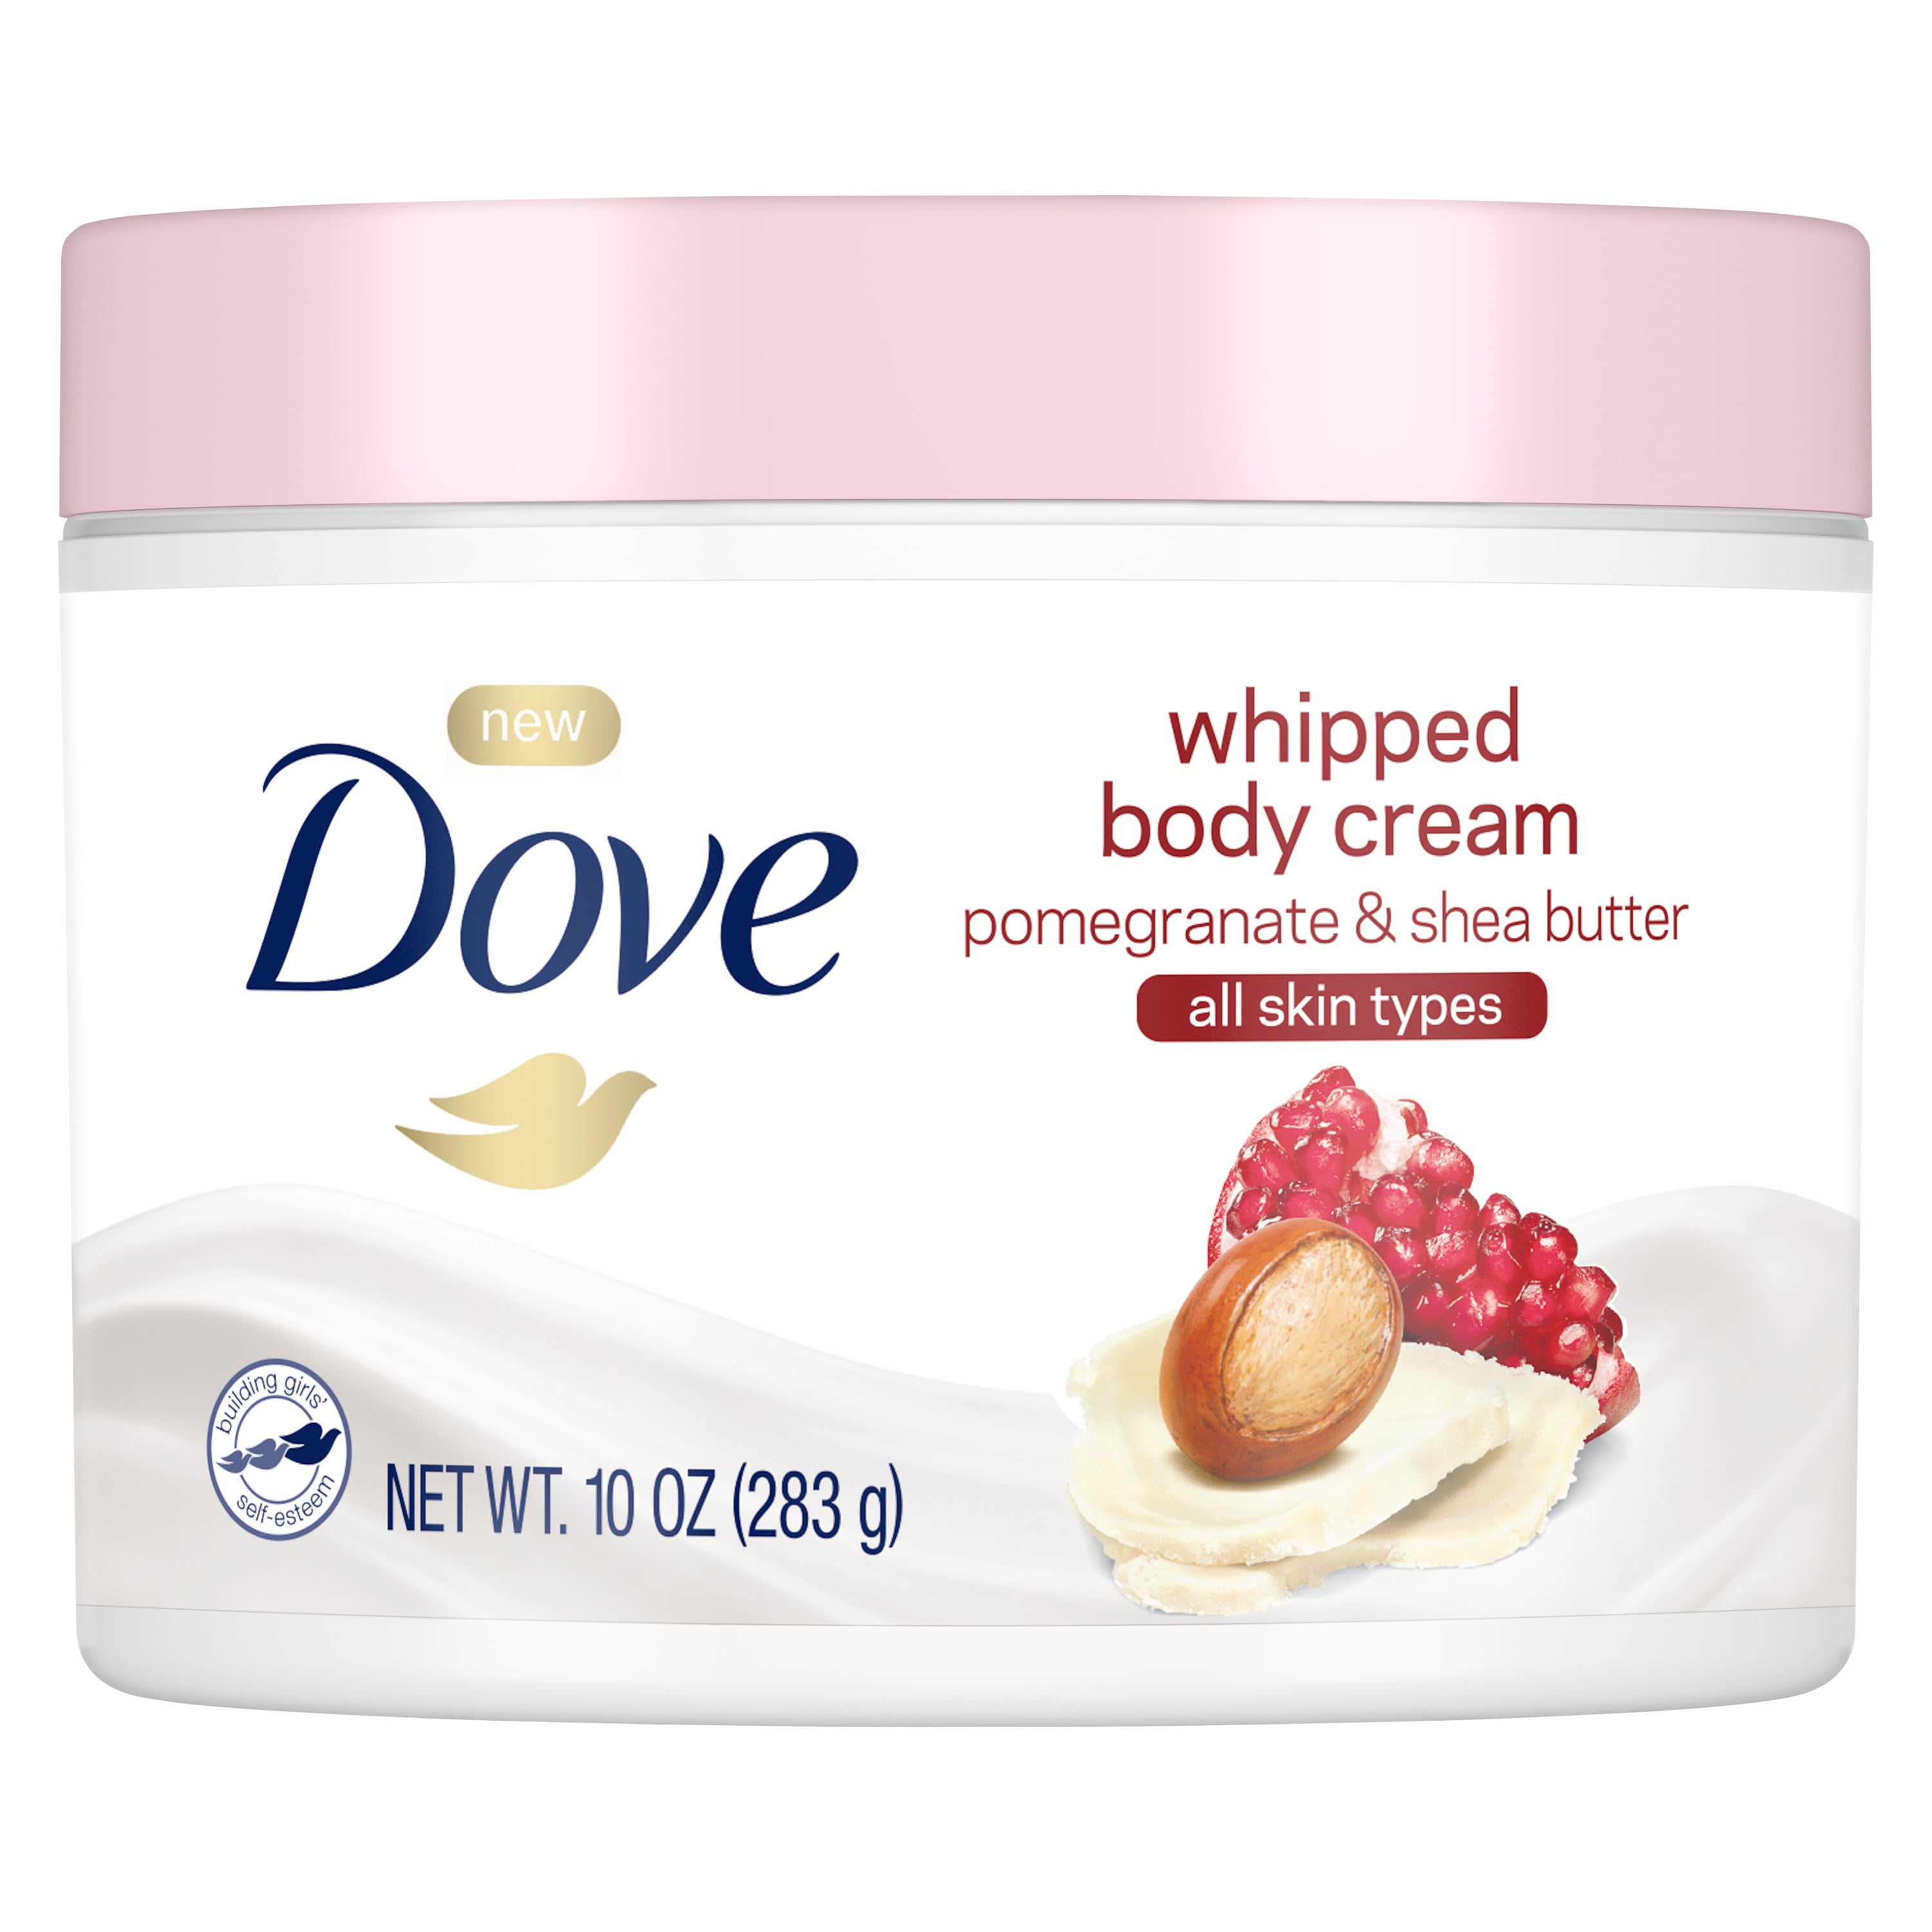 Dove Whipped Body Cream Dry Skin Moisturizer Pomegranate and Shea Butter Nourishes Skin Deeply 10oz pic picture pic